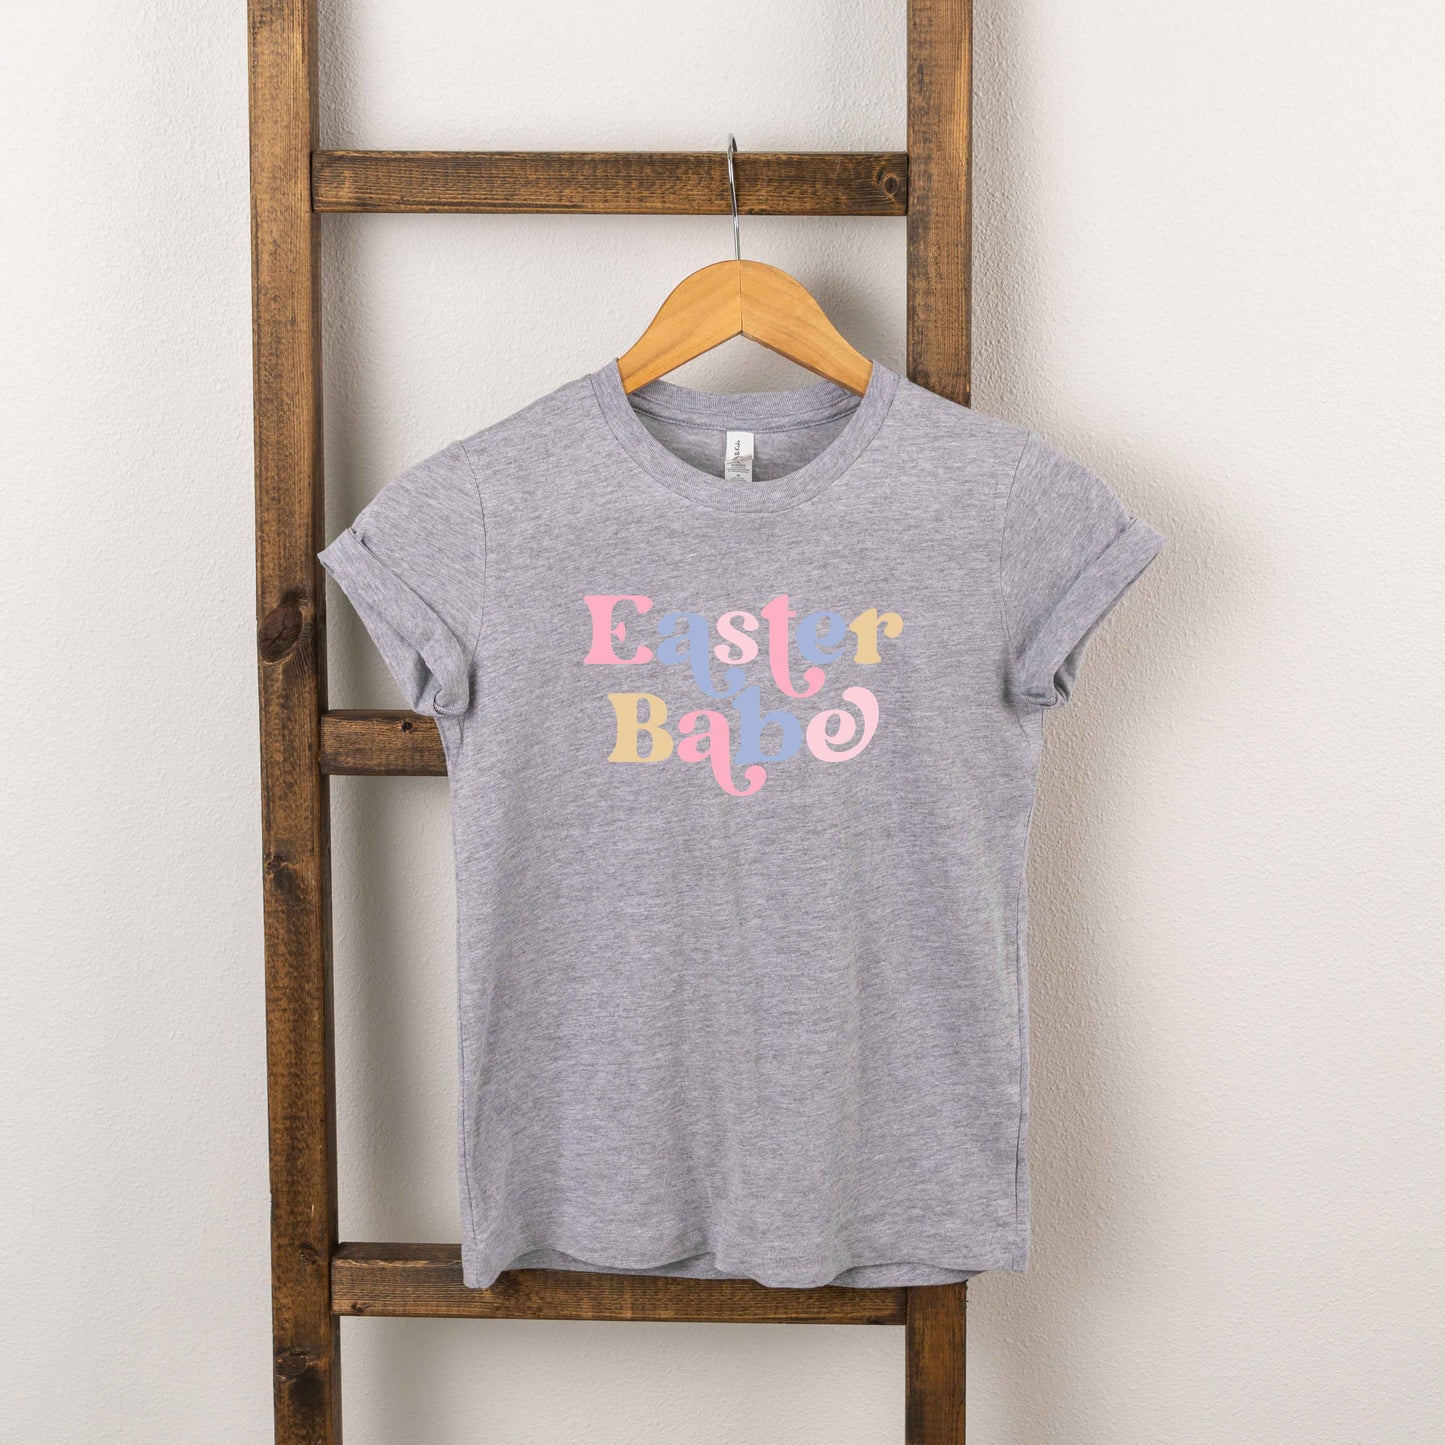 Easter Babe Colorful | Toddler Short Sleeve Crew Neck